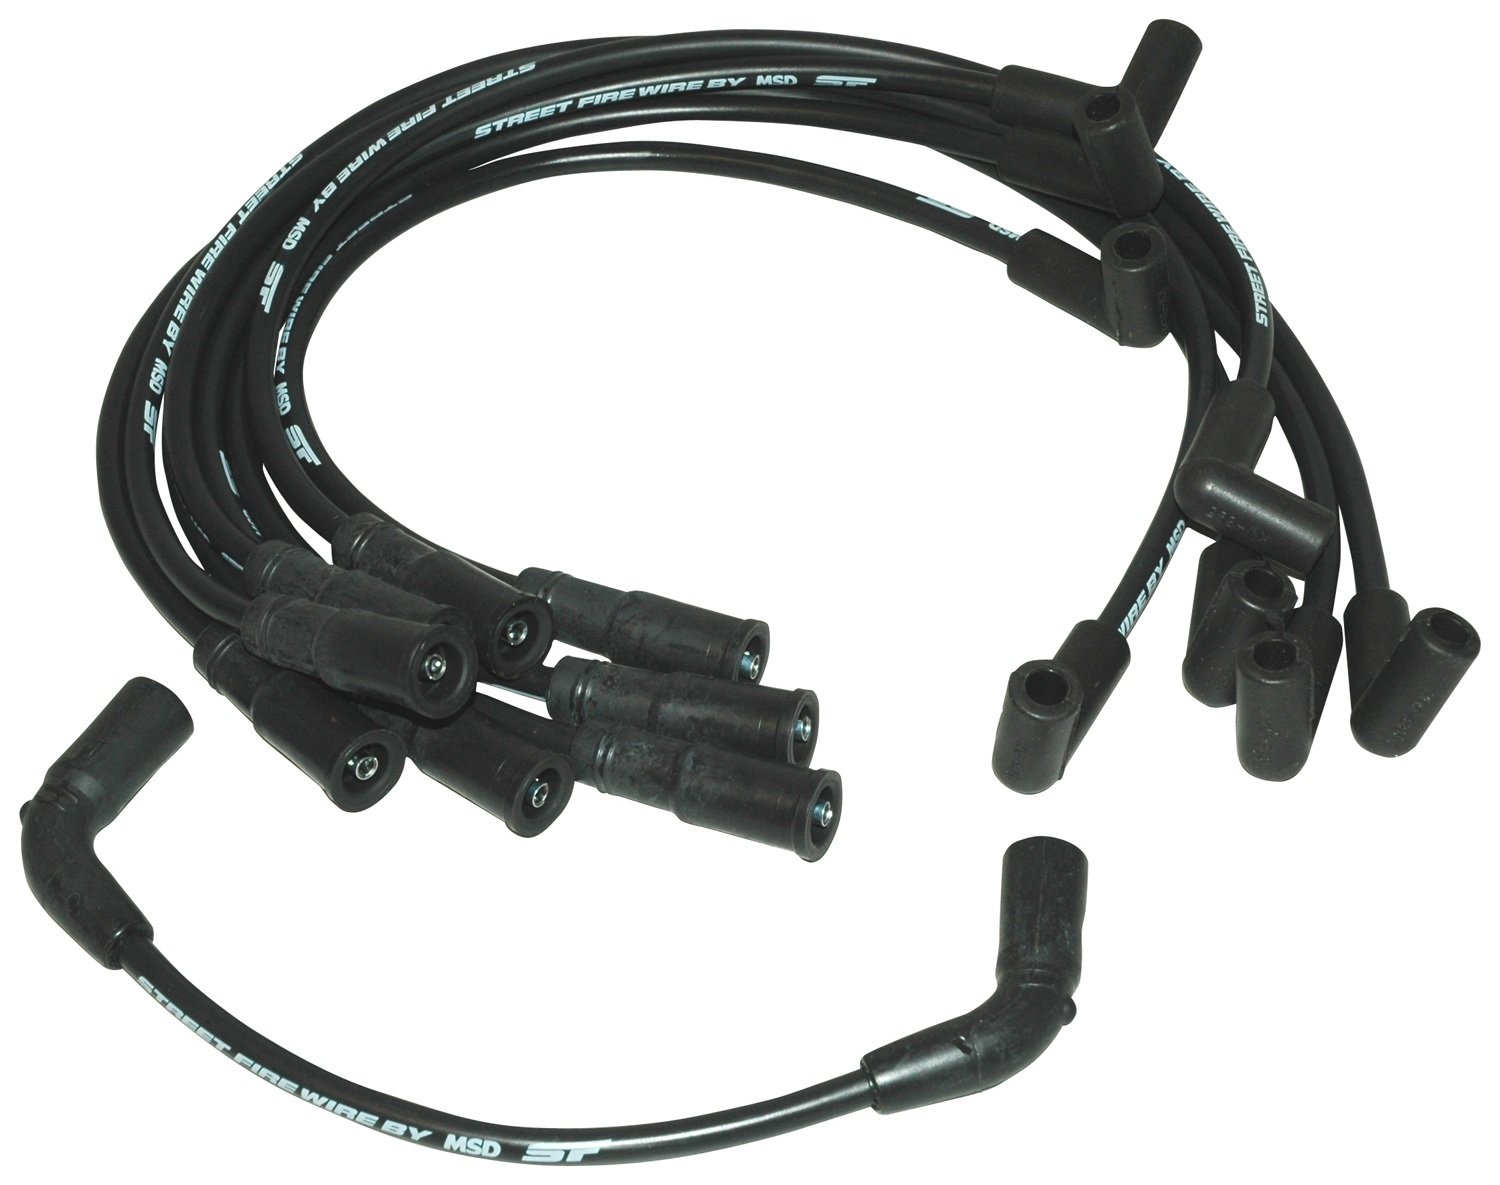 Street Fire Spark Plug Wires for 1996-2003 GM Vortec Truck [Small Block]